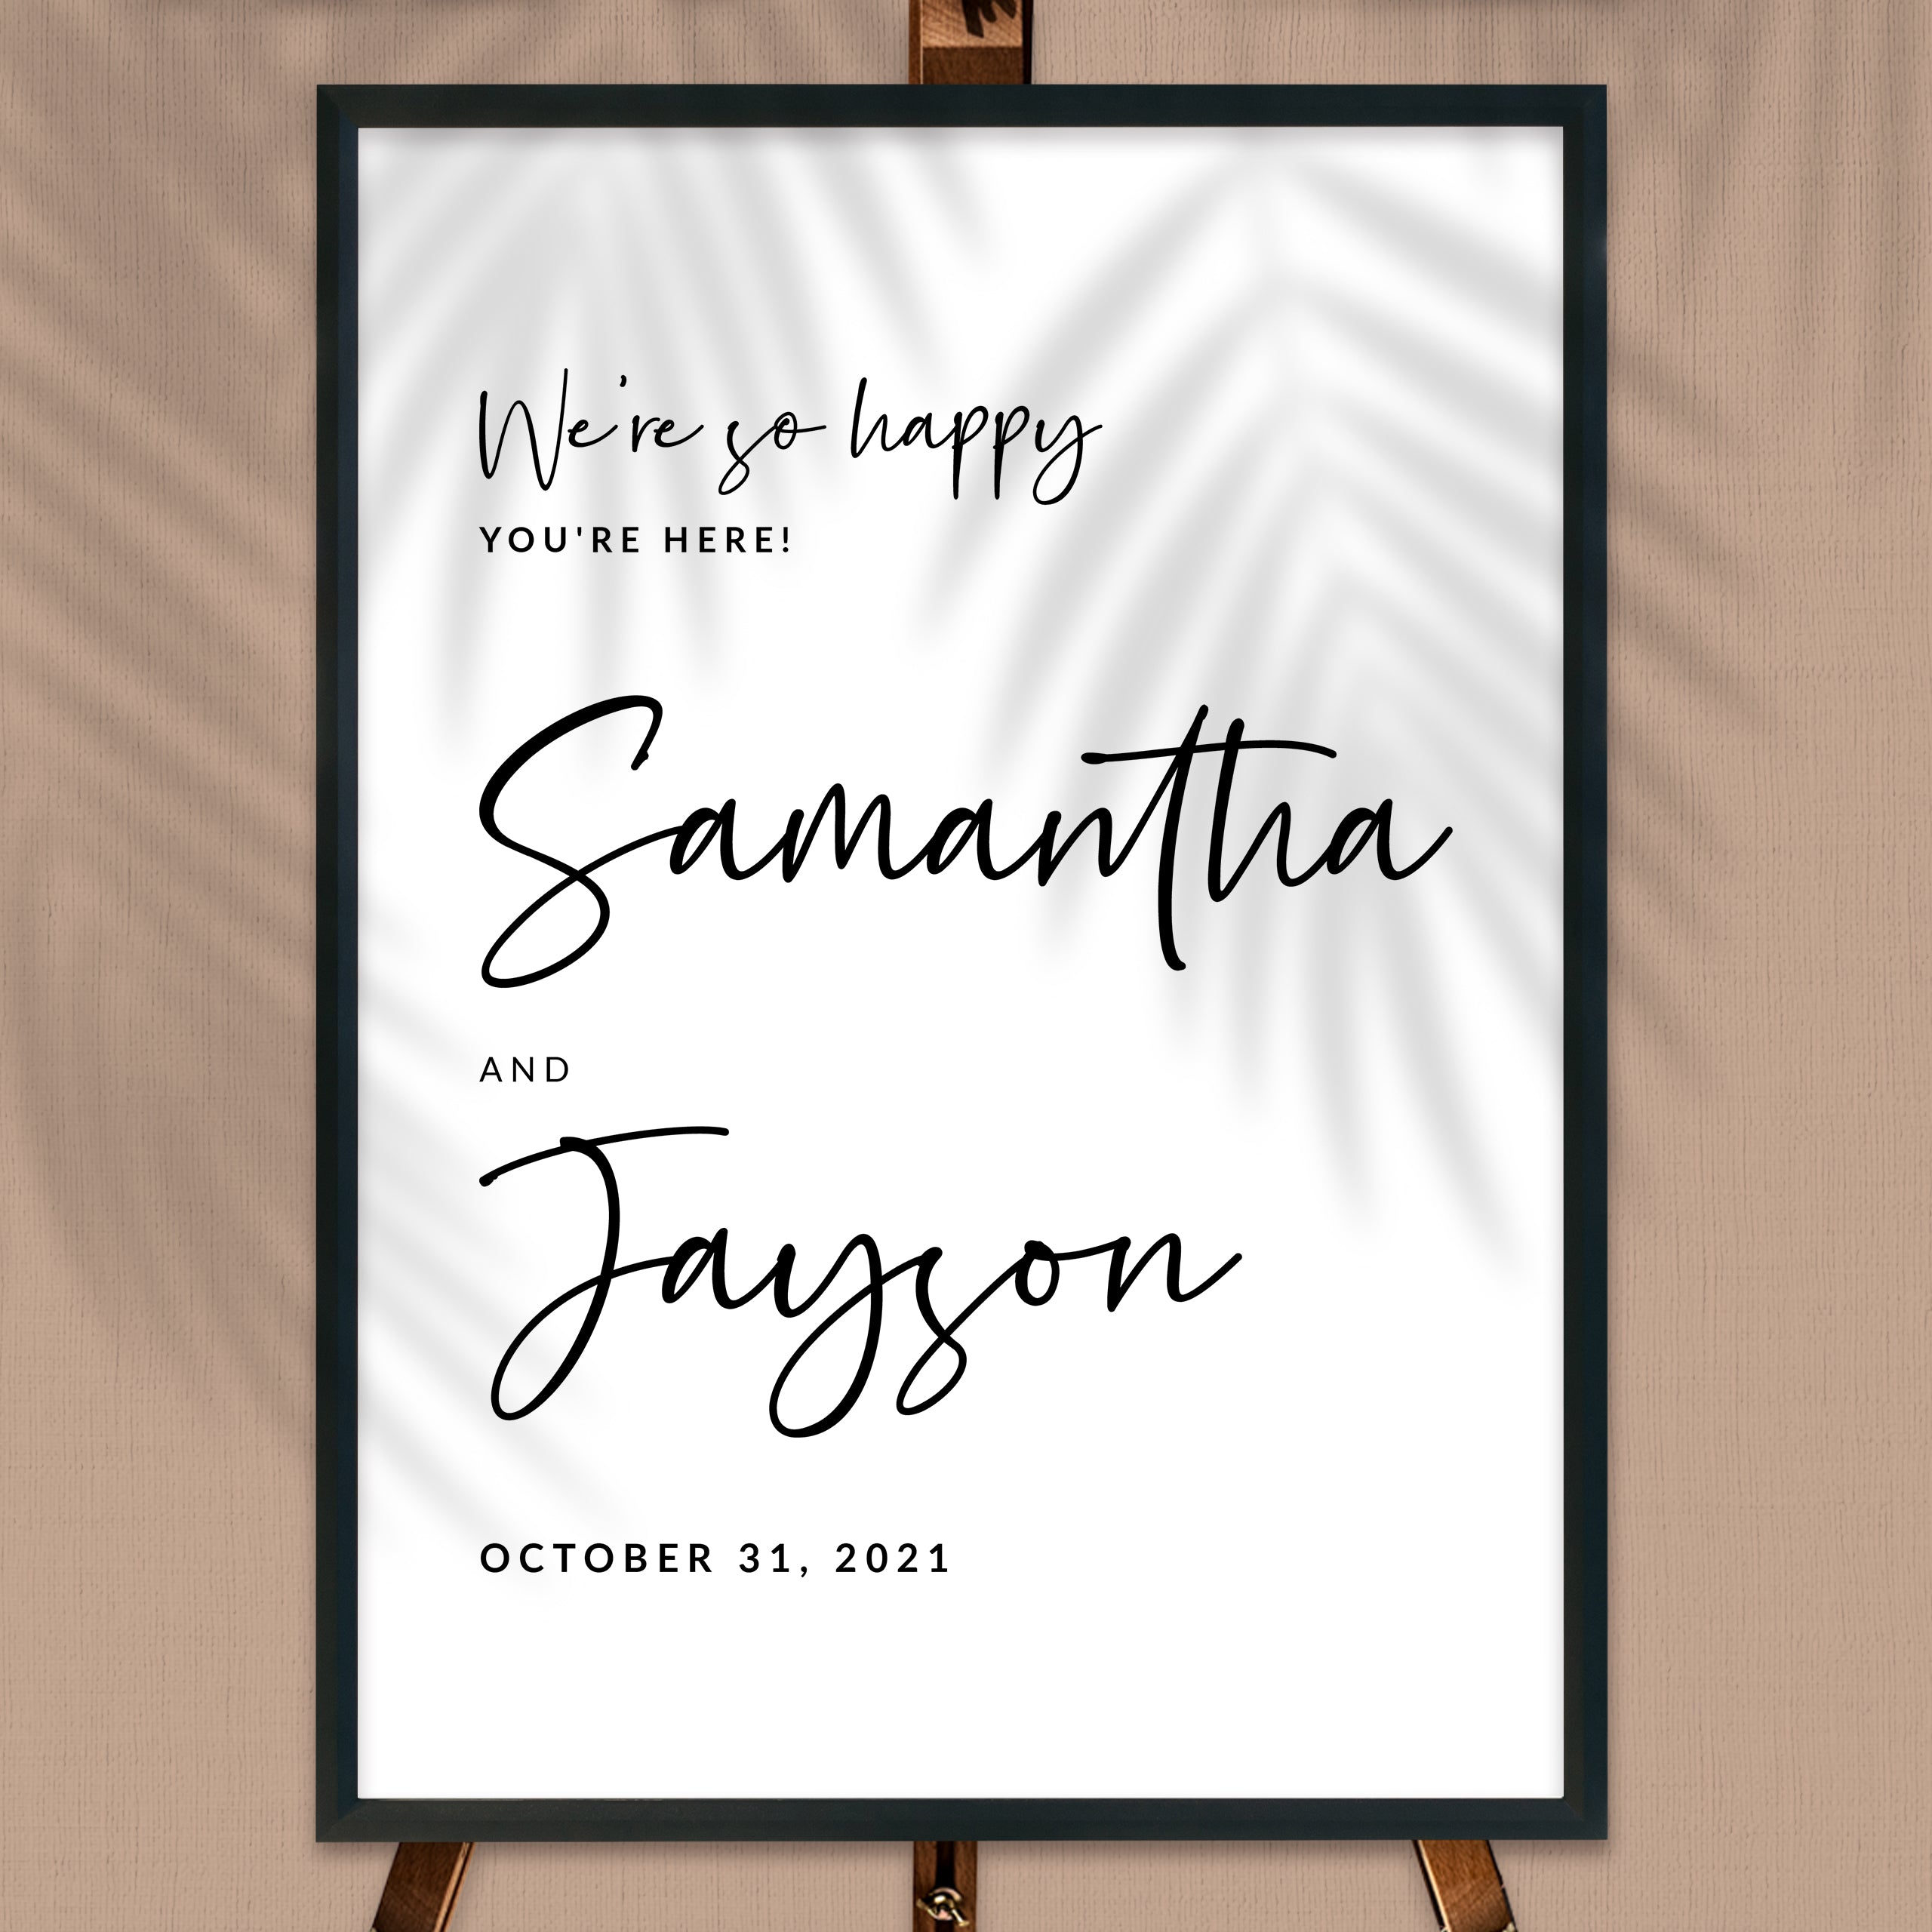 We're So Happy That You're Here Wedding Welcome Board Sign